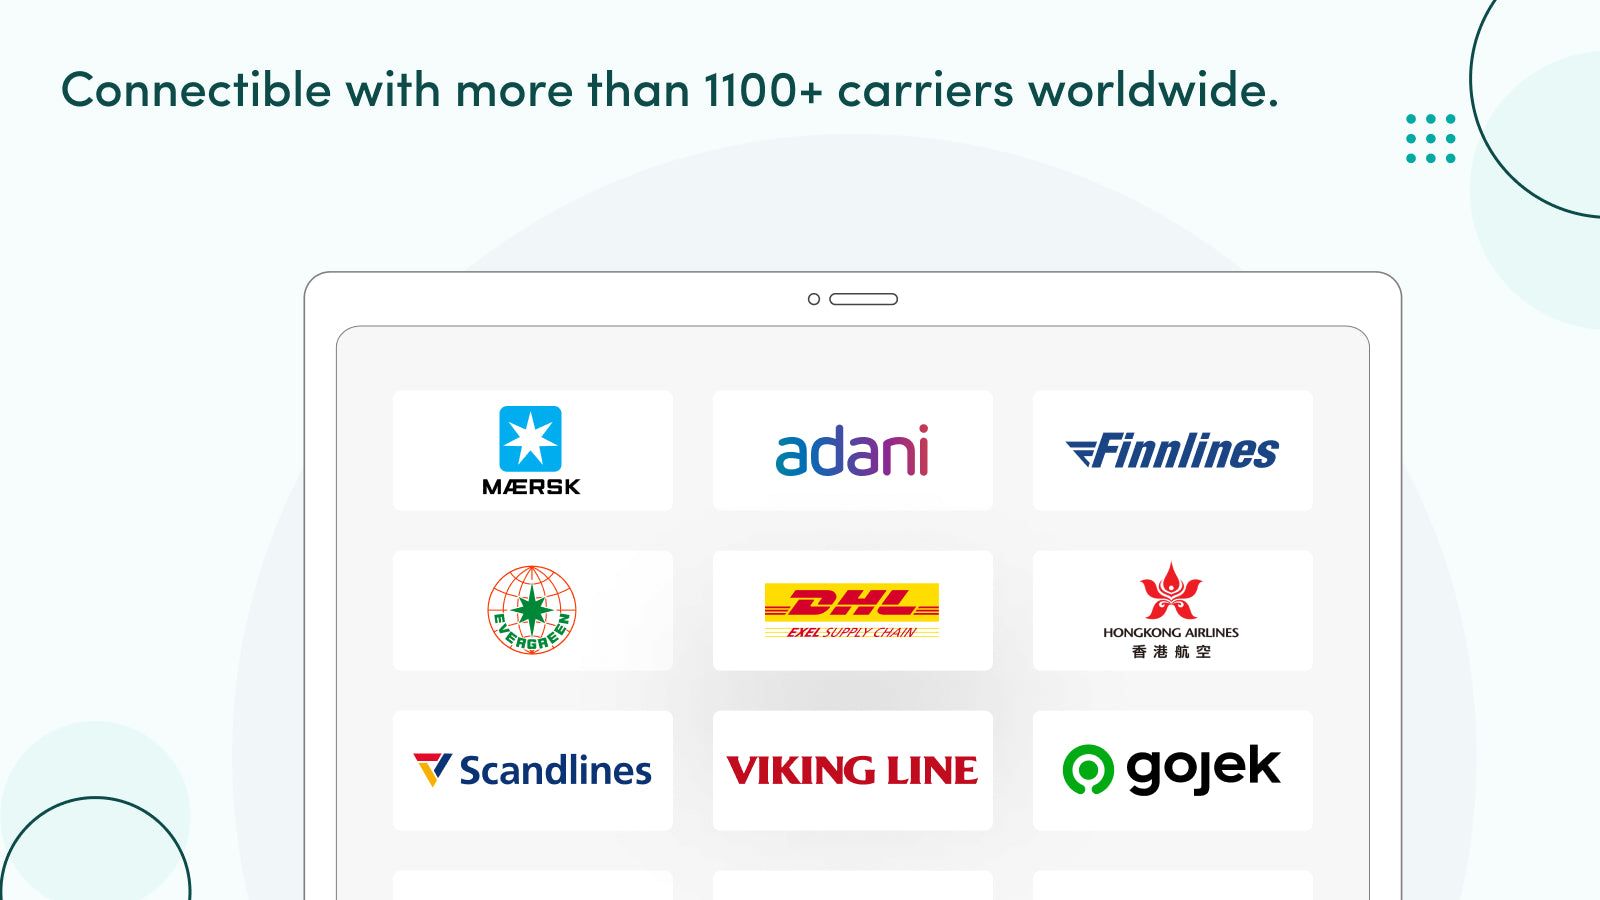 You can connect with more than 1100 carriers worldwide.